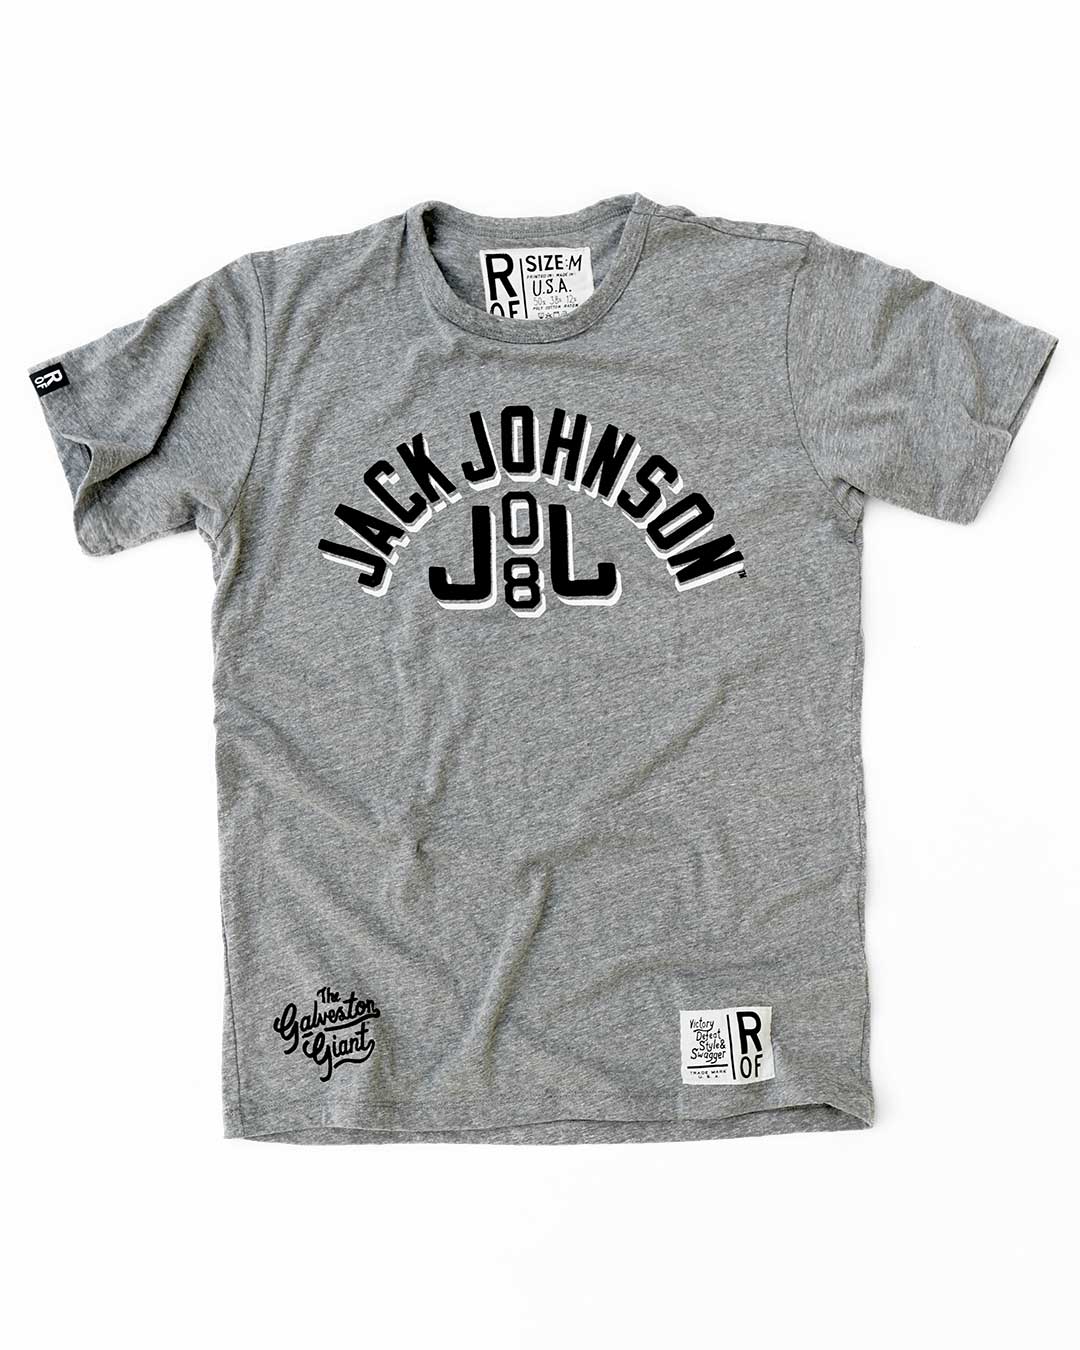 Jack Johnson 1908 Champ Triblend Tee - Roots of Fight Canada